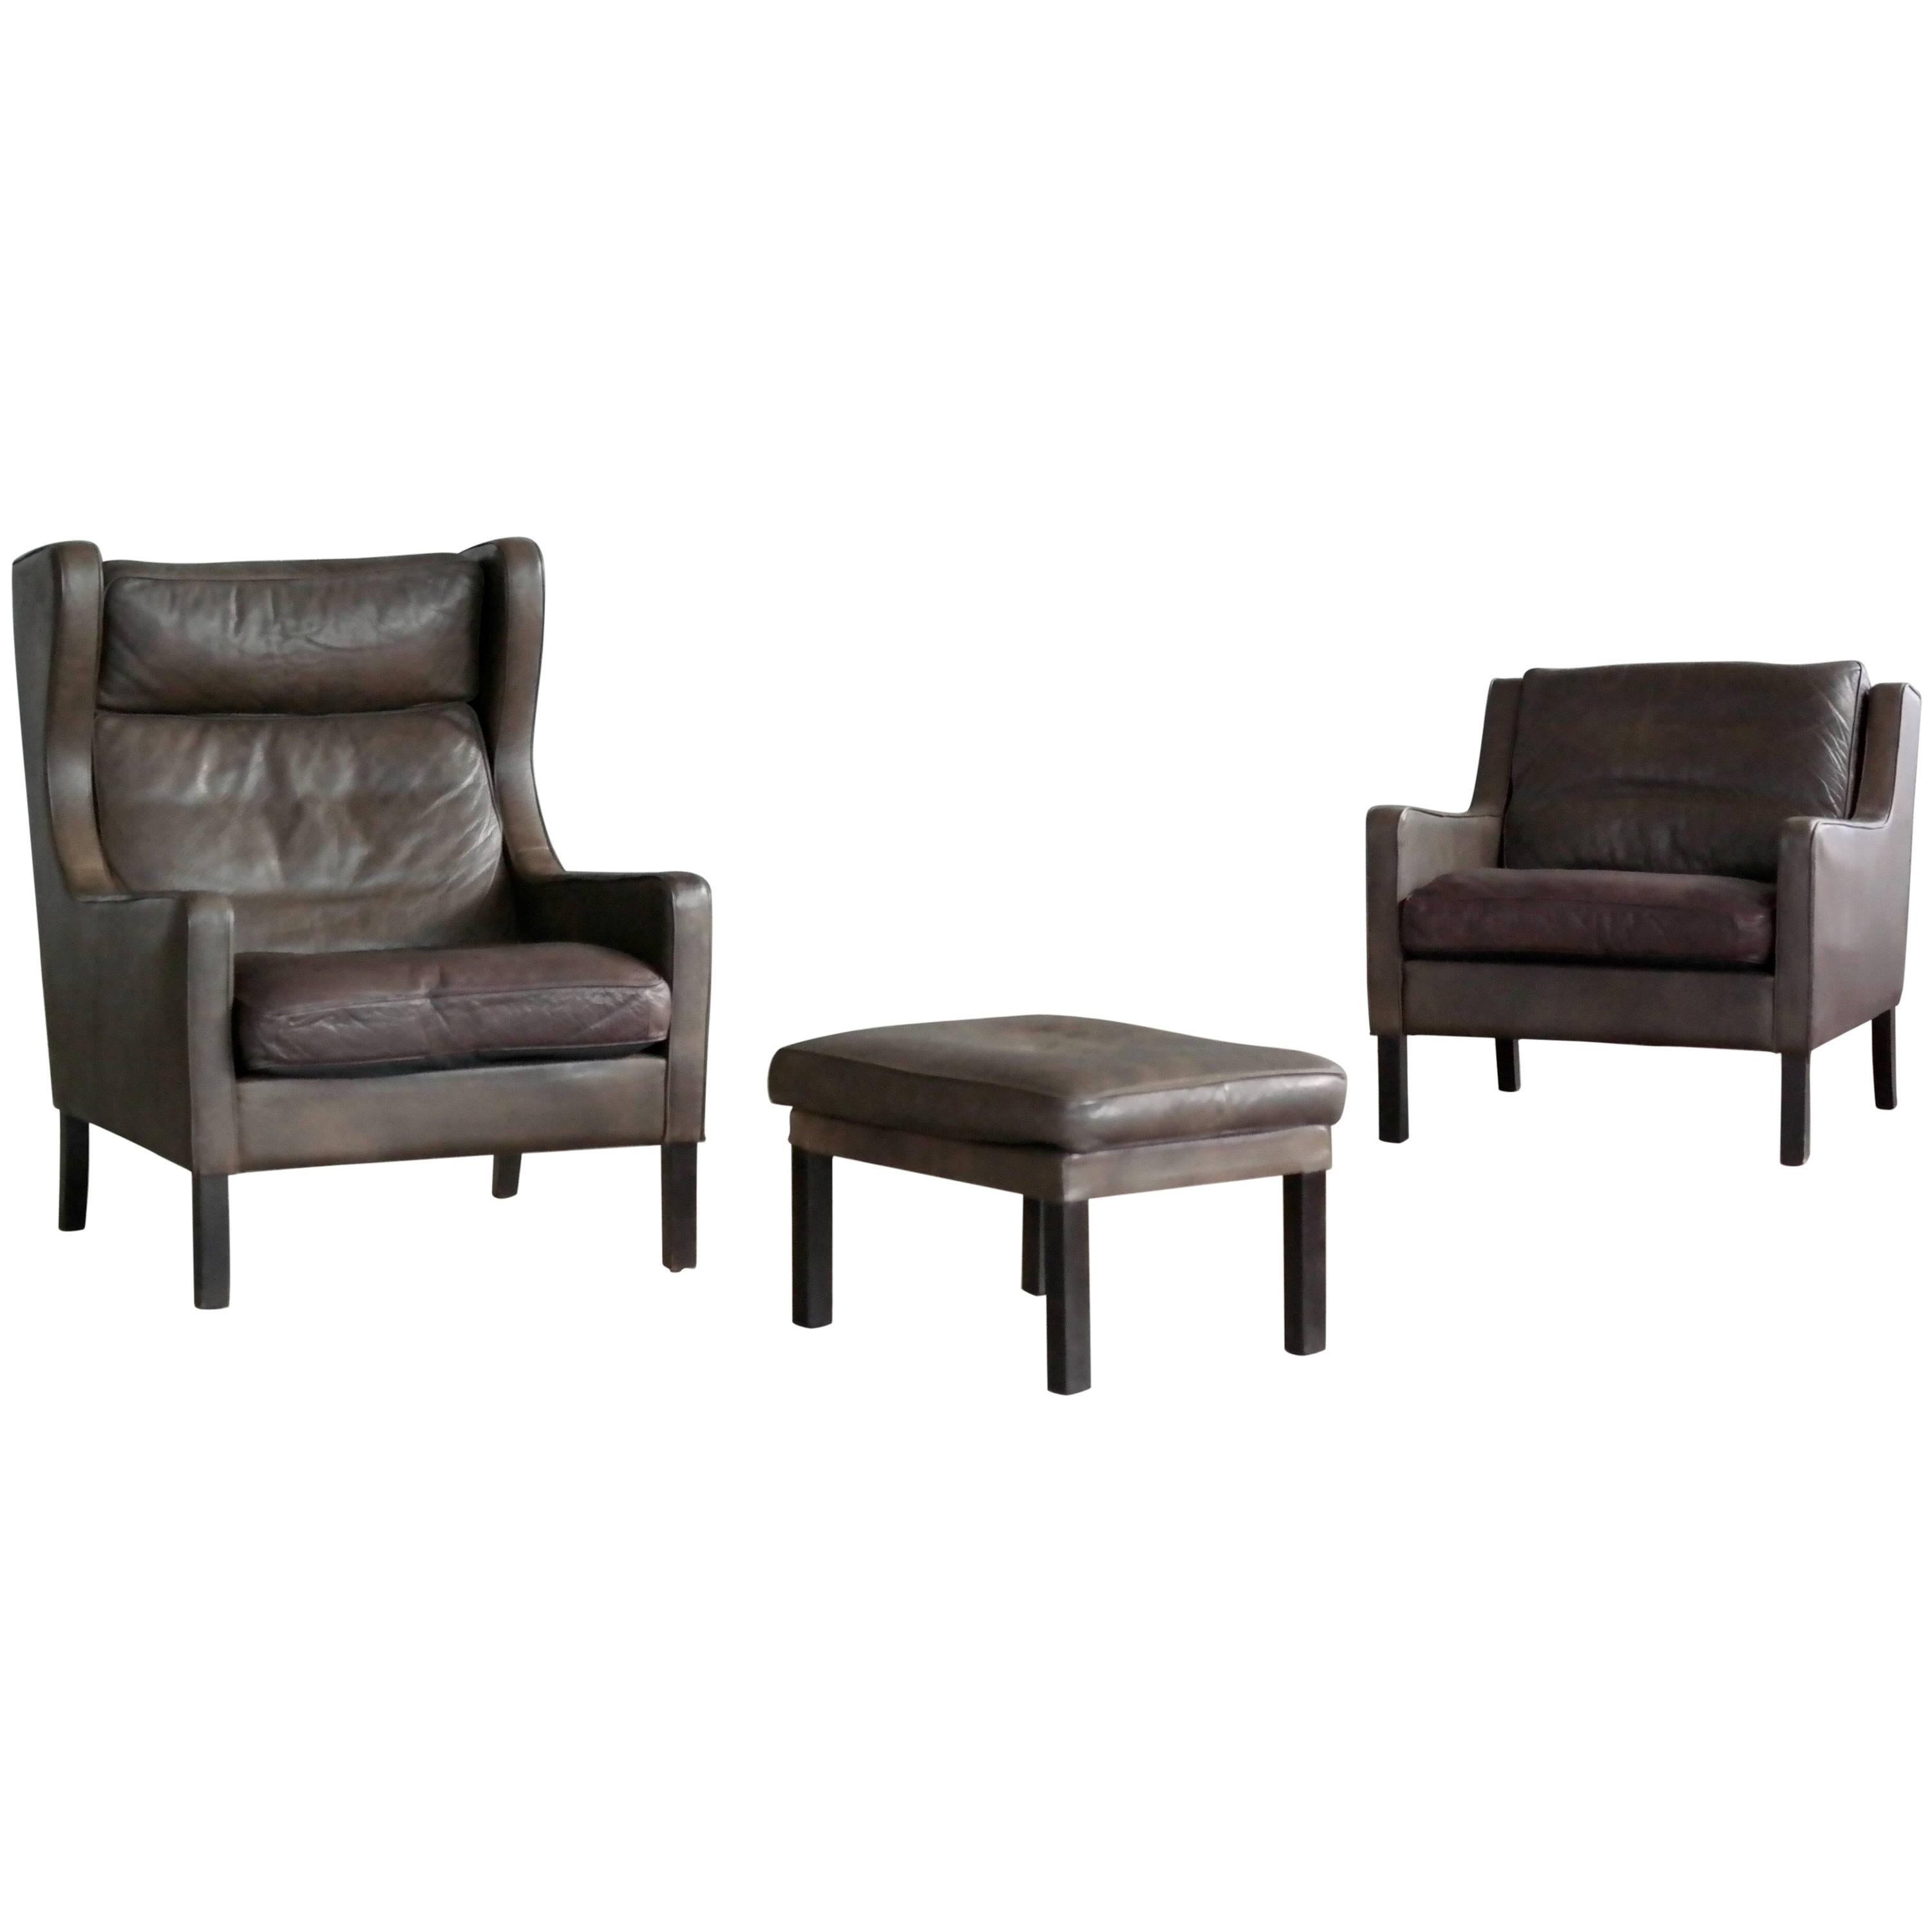 Børge Mogensen Style Pair of Lounge Chairs and Ottoman in Dark Olive Leather